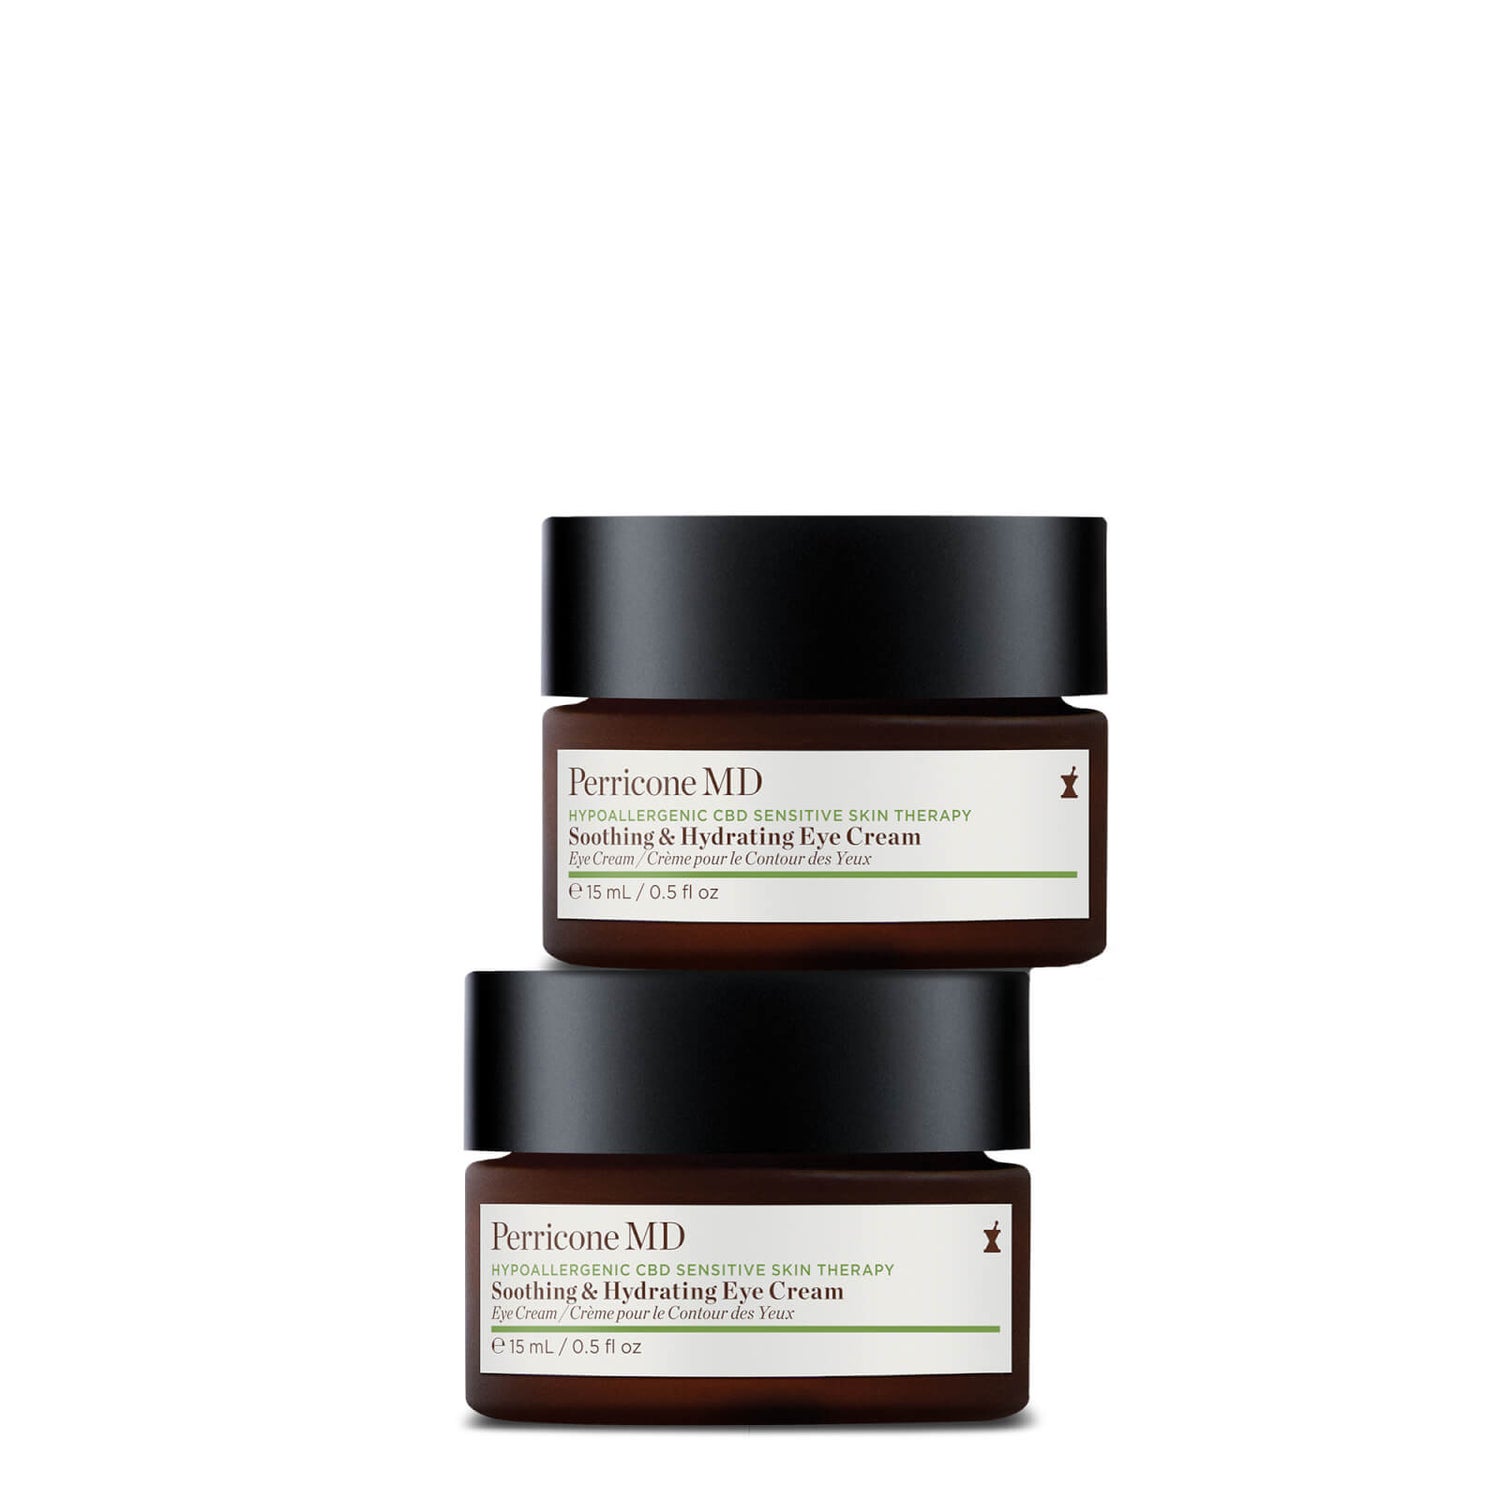 Hypoallergenic CBD Sensitive Skin Therapy Soothing & Hydrating Eye Cream Duo